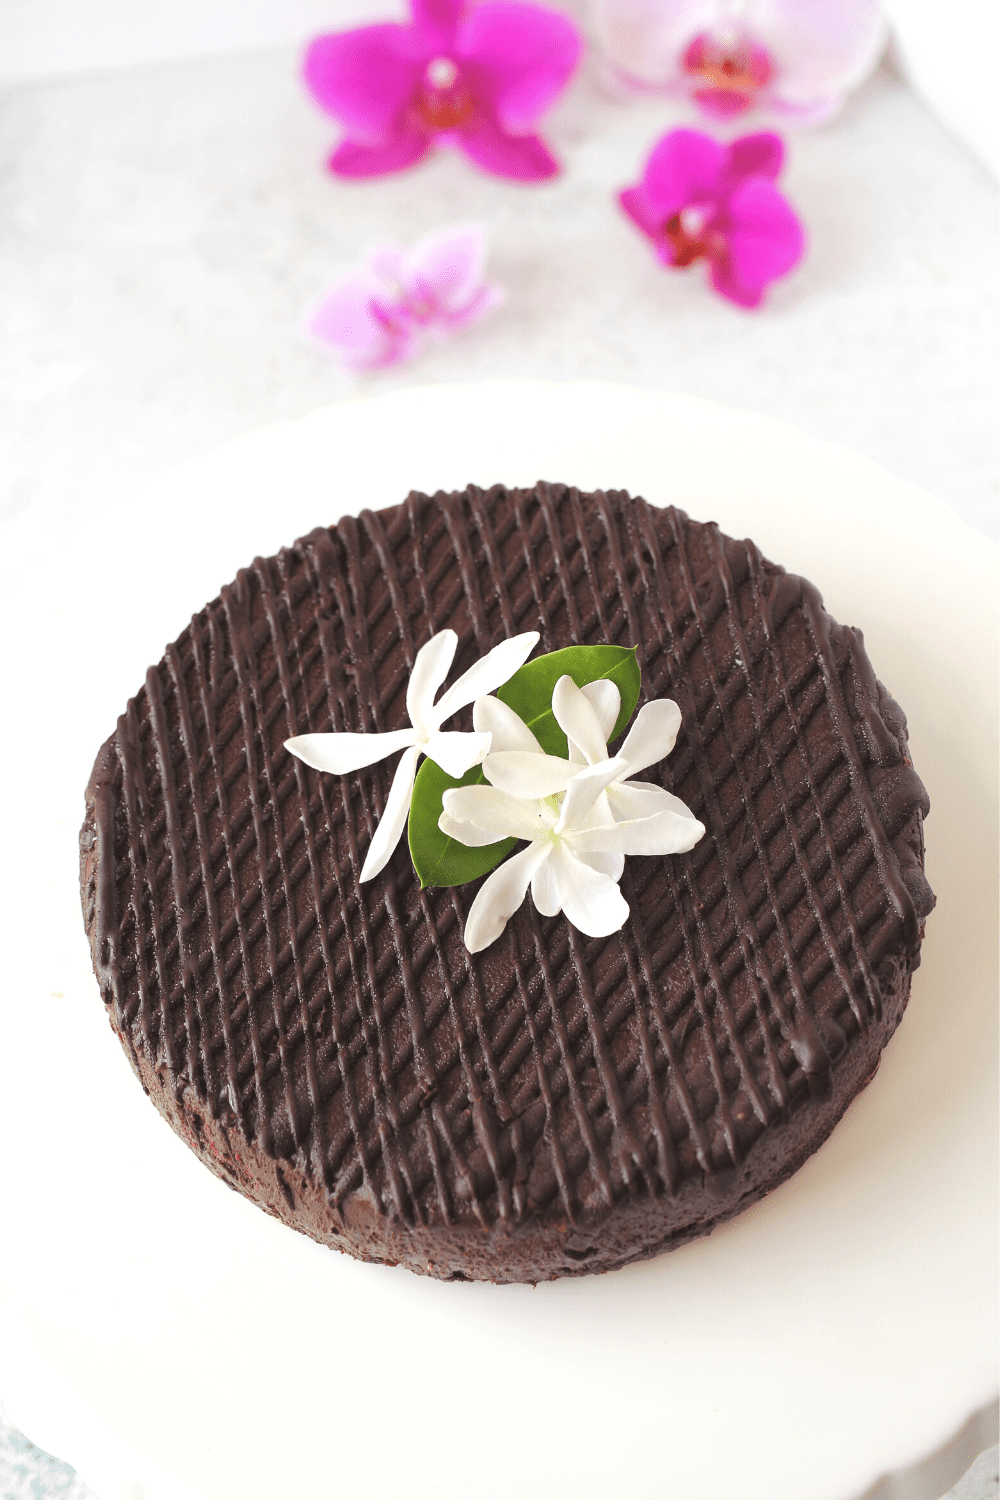 a sugar-free flourless cake on a cake stand wtih chocolate sugar-free ganache drizzled over the gluten-free chocolate cake.  Flowers adorn the cake as decorations